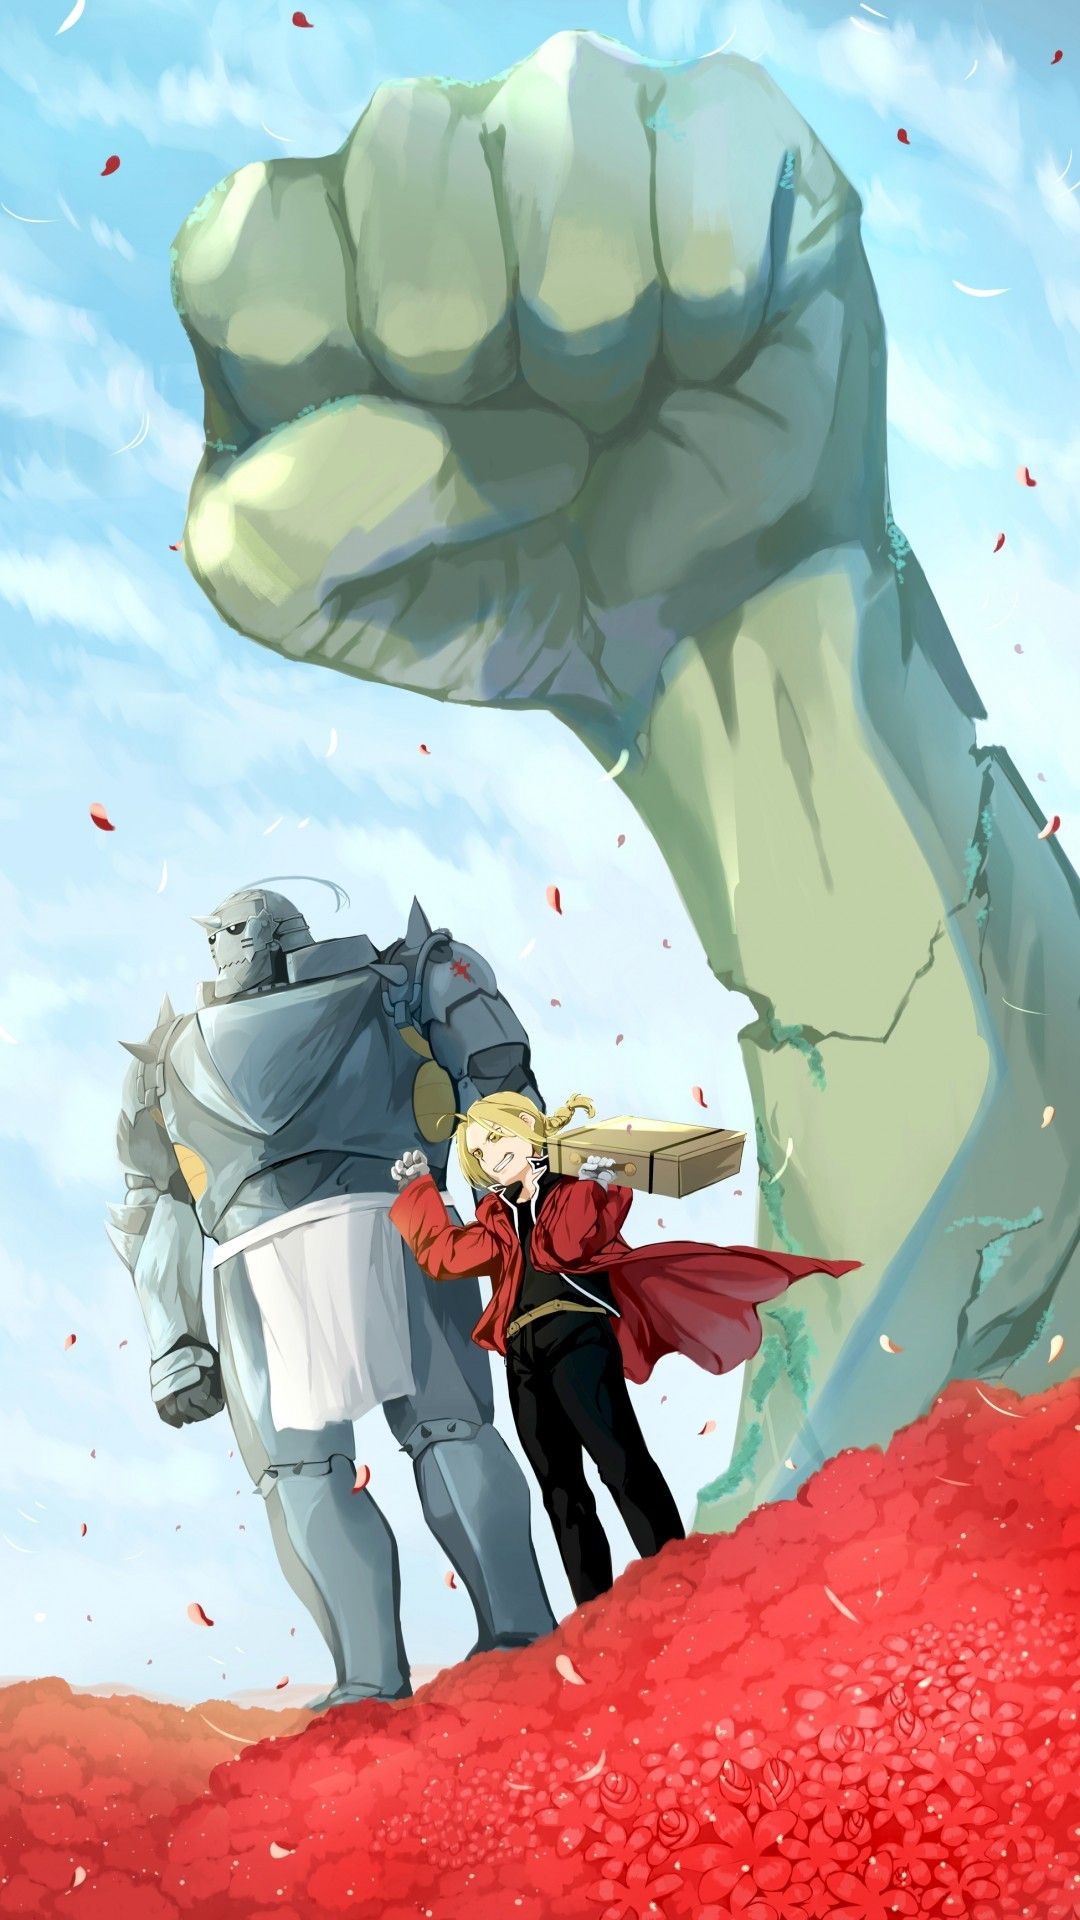 Download 1080x1920 Edward Elric, Alphonse Elric, Fullmetal Alchemist Brotherhood, Artwork Wallpaper for iPhone iPhone 7 Plus, iPhone 6+, Sony Xperia Z, HTC One